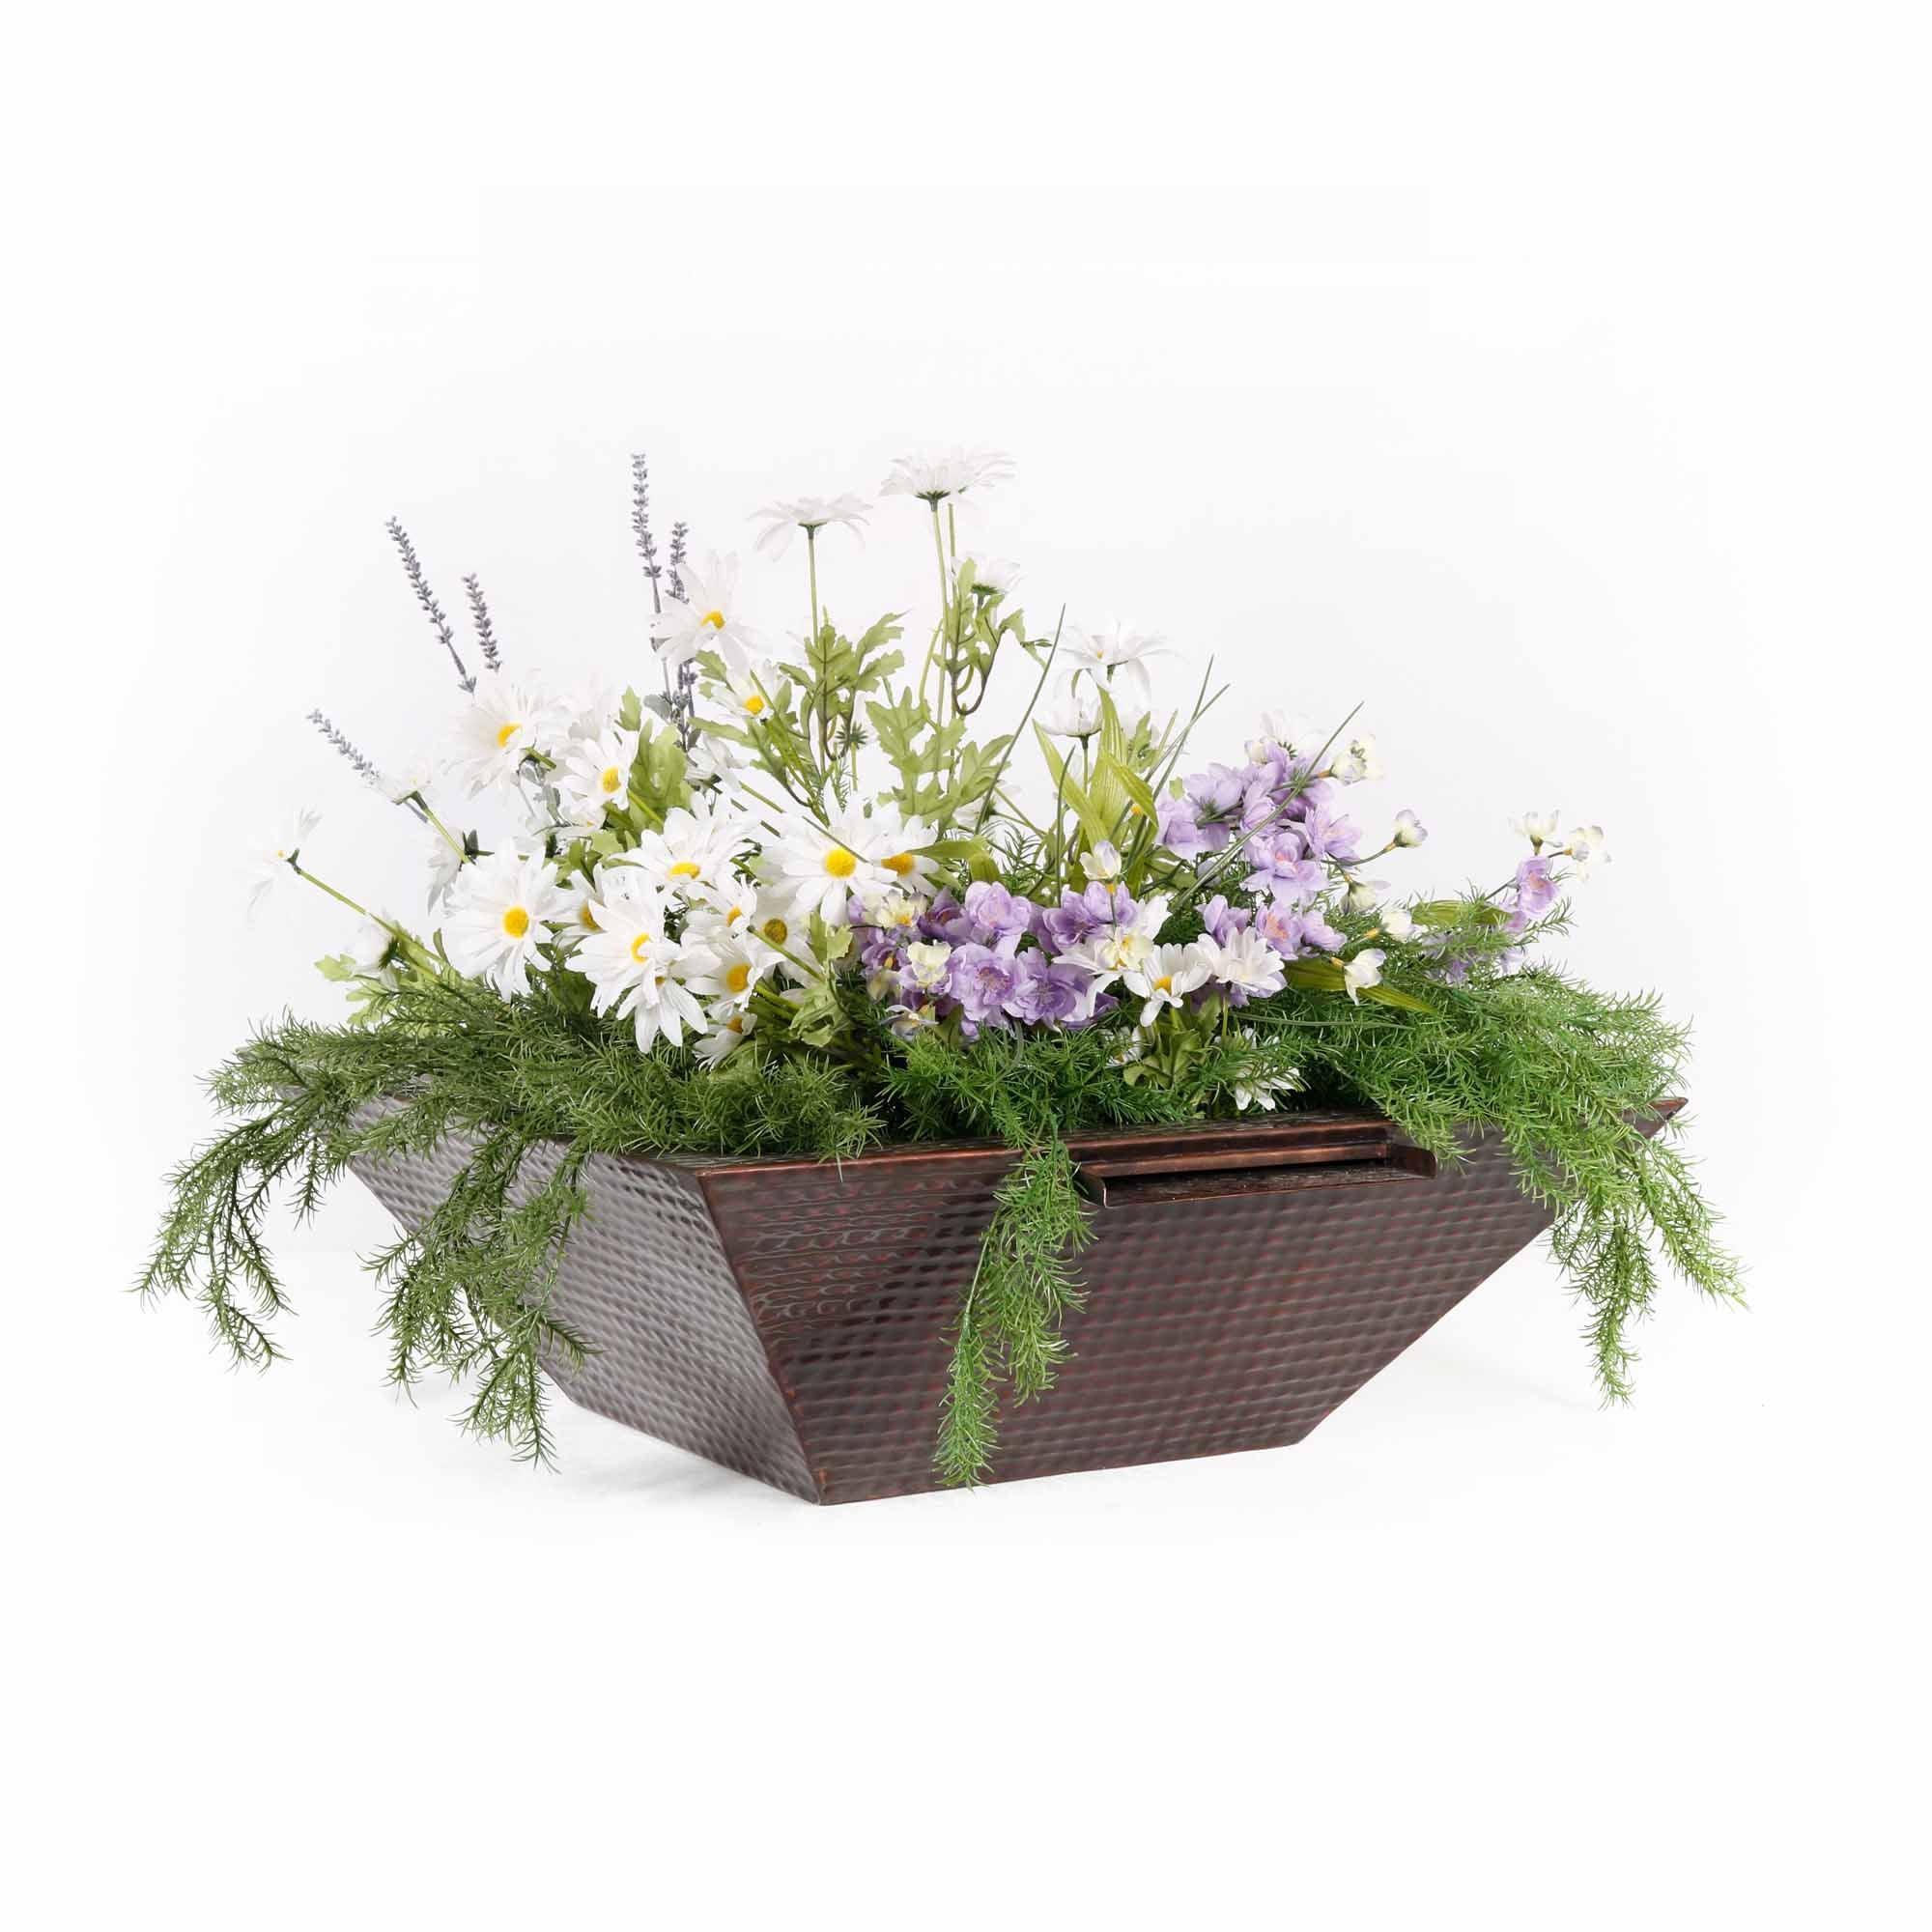 The Outdoor Plus Maya Planter and Water Bowl - Hammered Copper